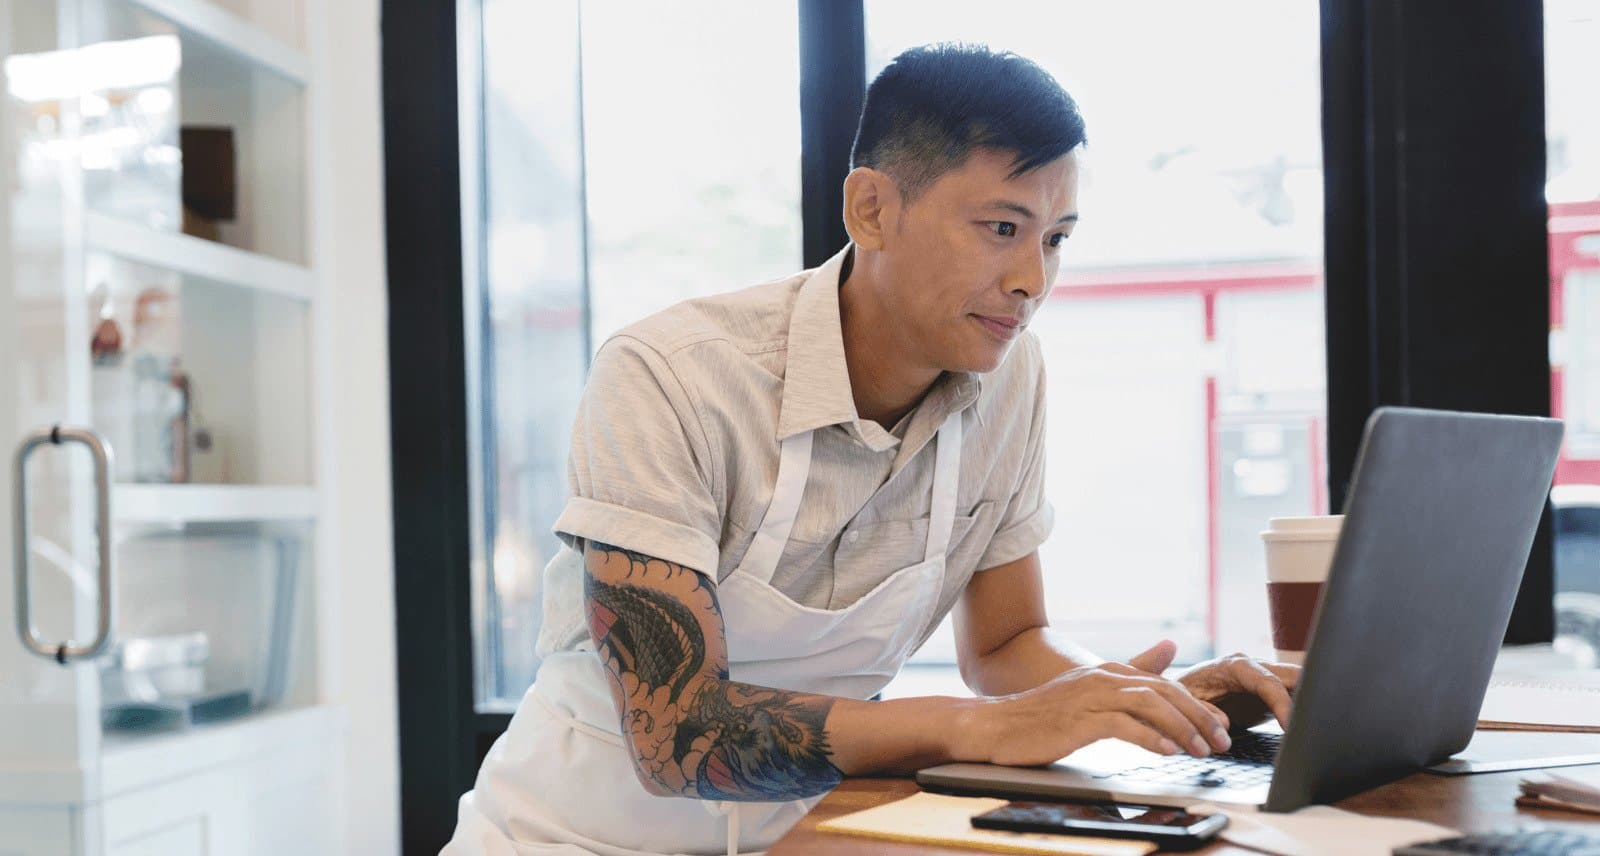 Young worker wearing an apron with tattoo sleeve using a laptop